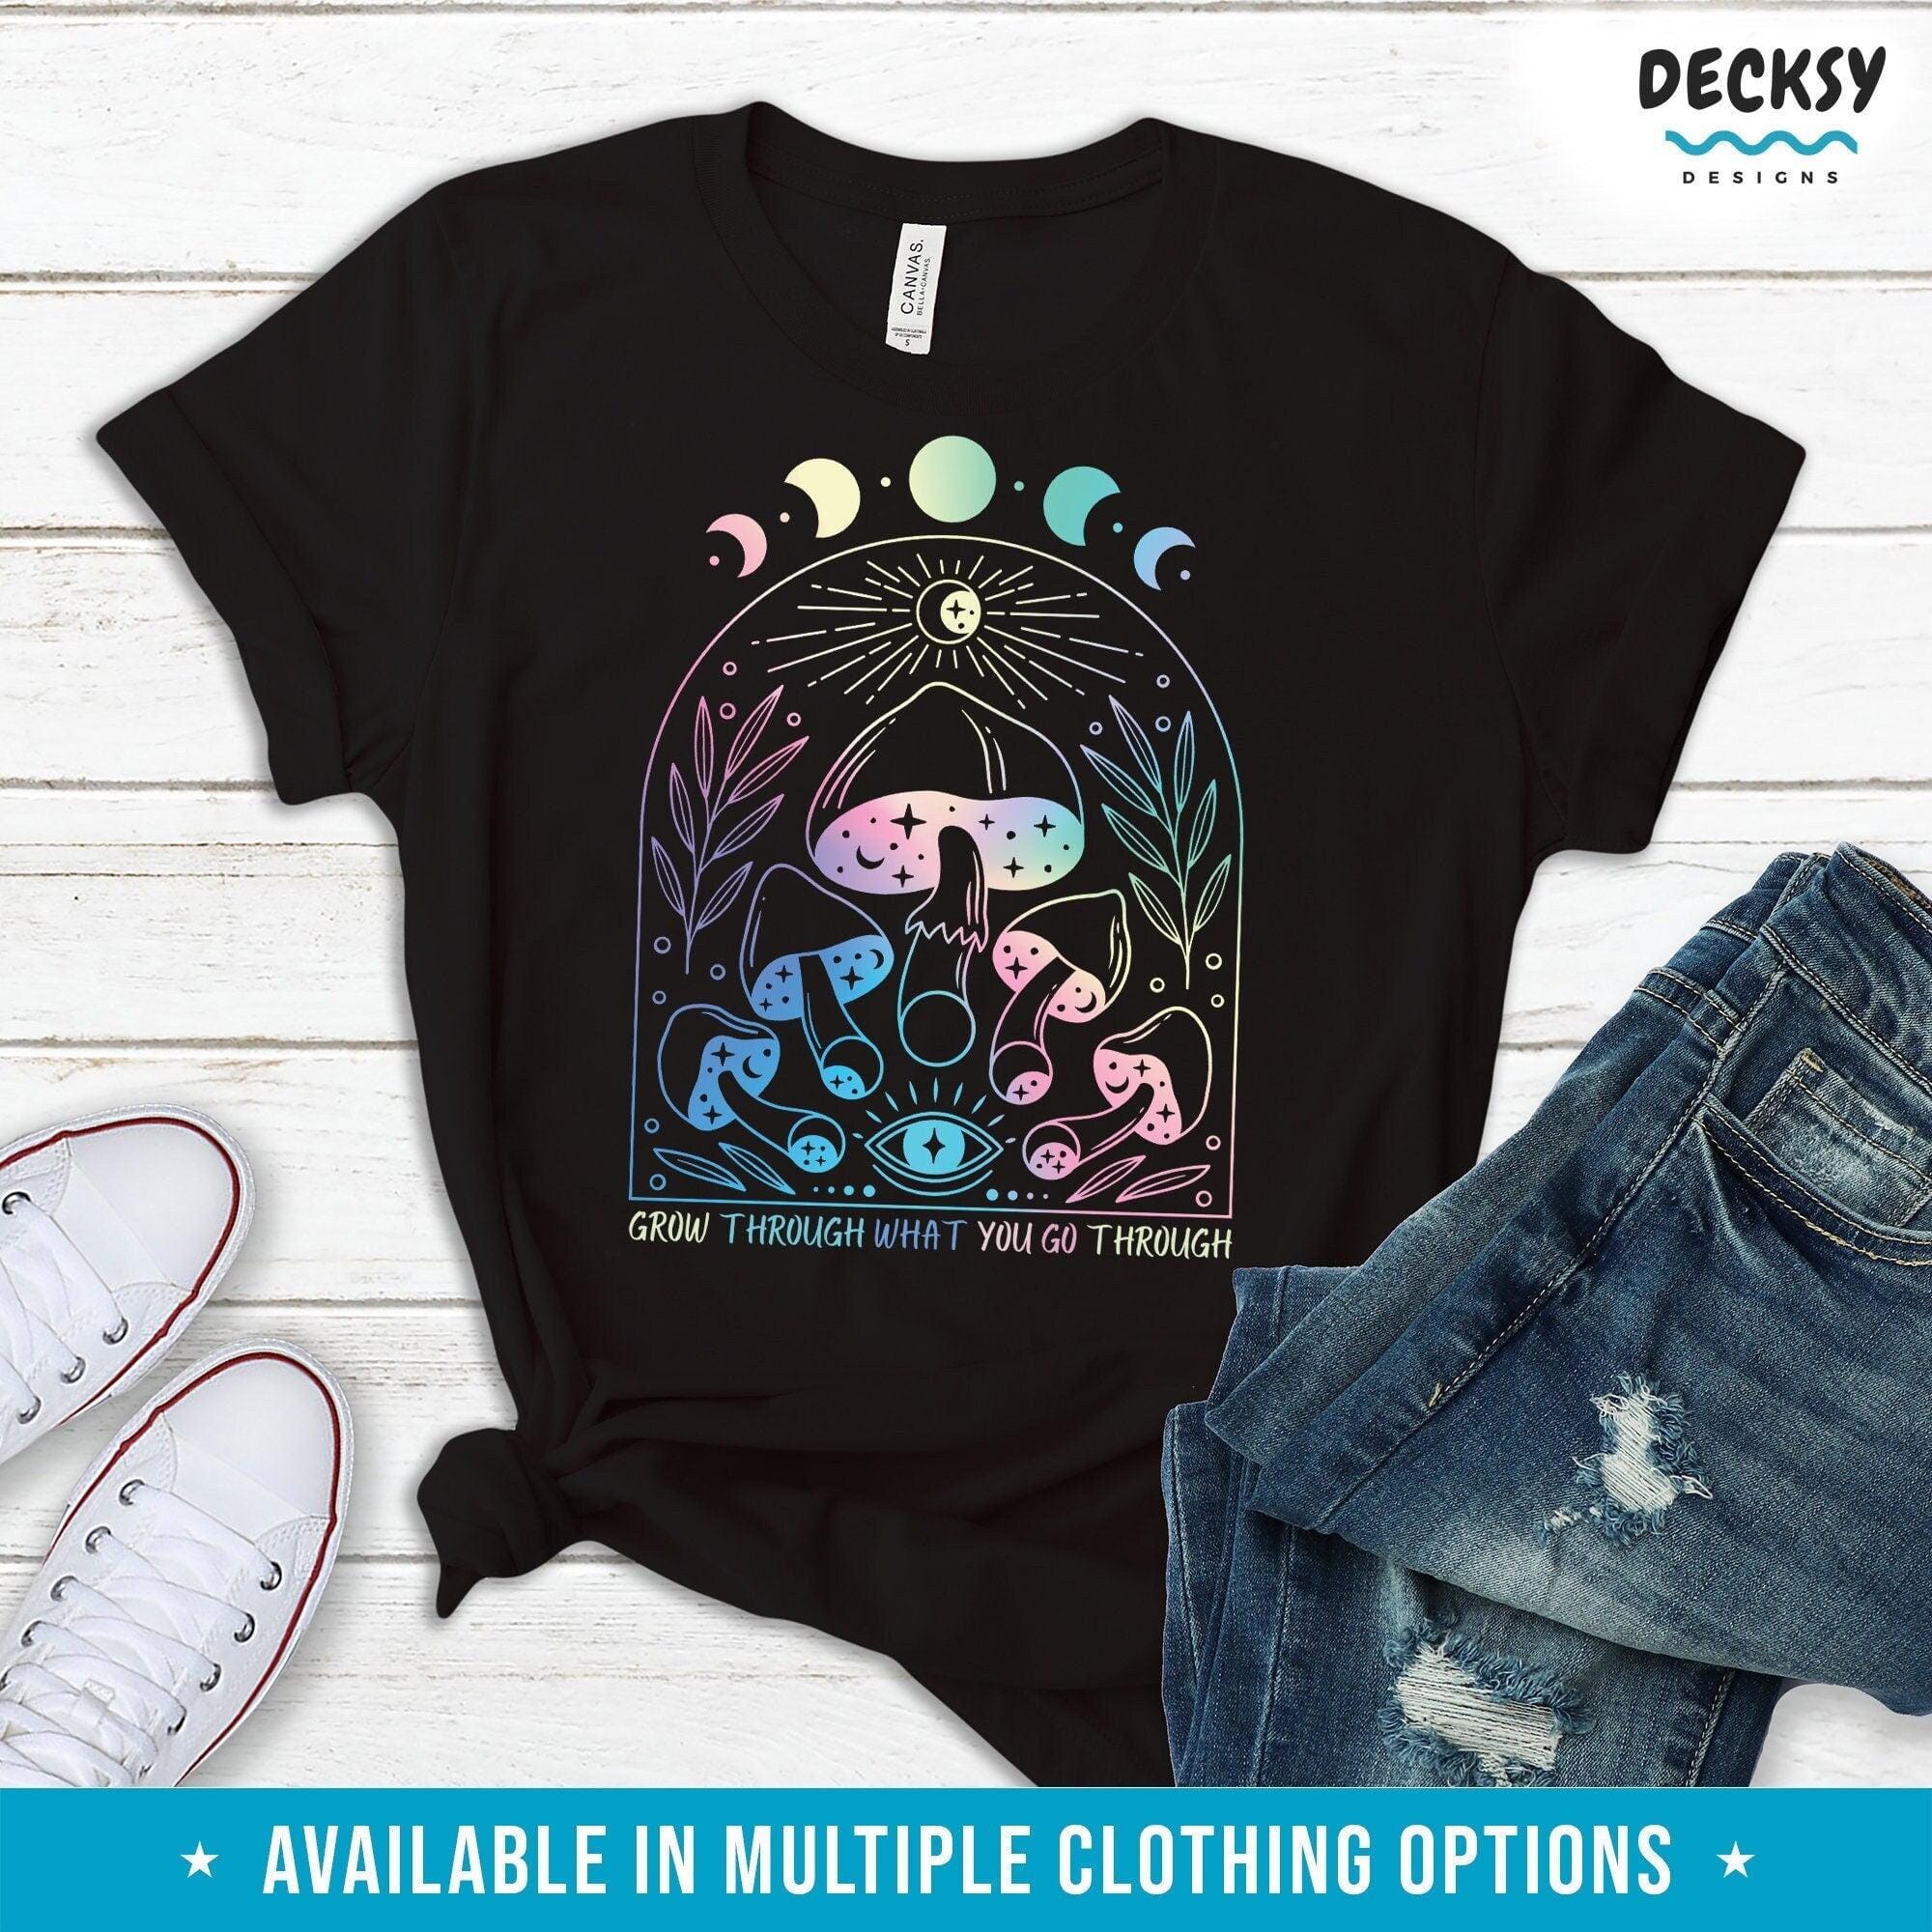 Mushroom Shirt, Gift for Friend-Clothing:Gender-Neutral Adult Clothing:Tops & Tees:T-shirts:Graphic Tees-DecksyDesigns